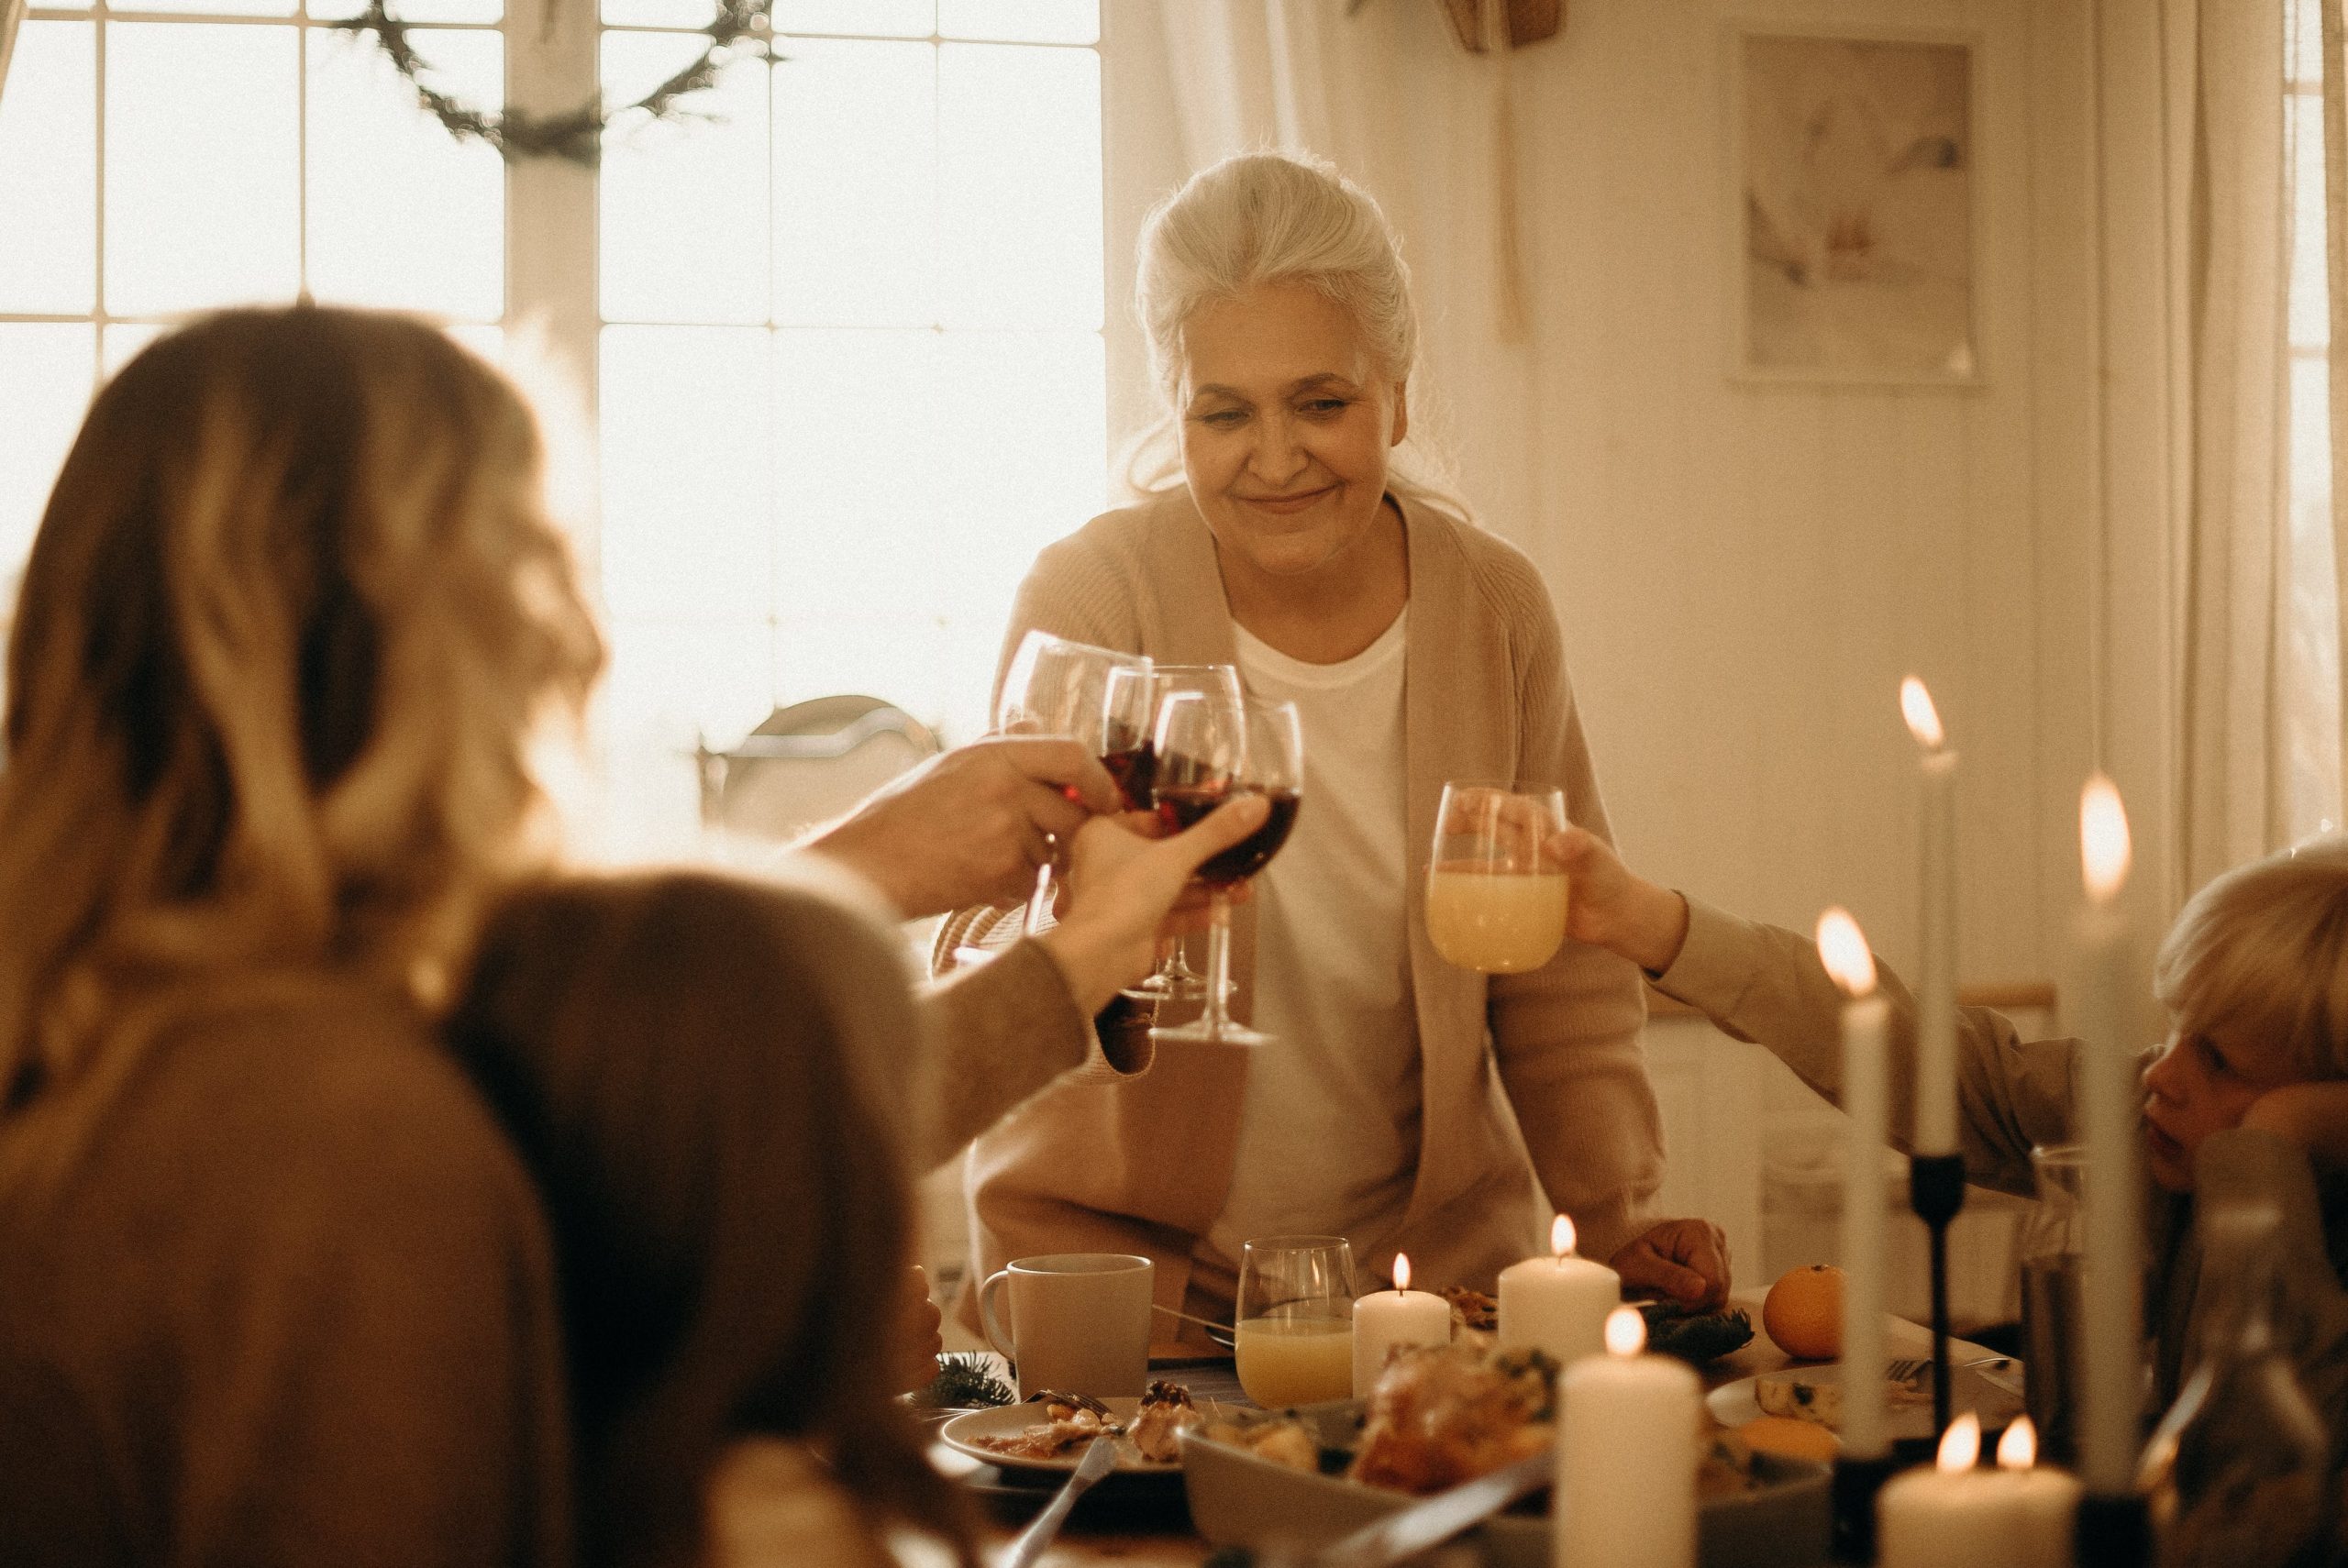 Elderly woman toasting with family during a warm, candlelit dinner gathering at home. 